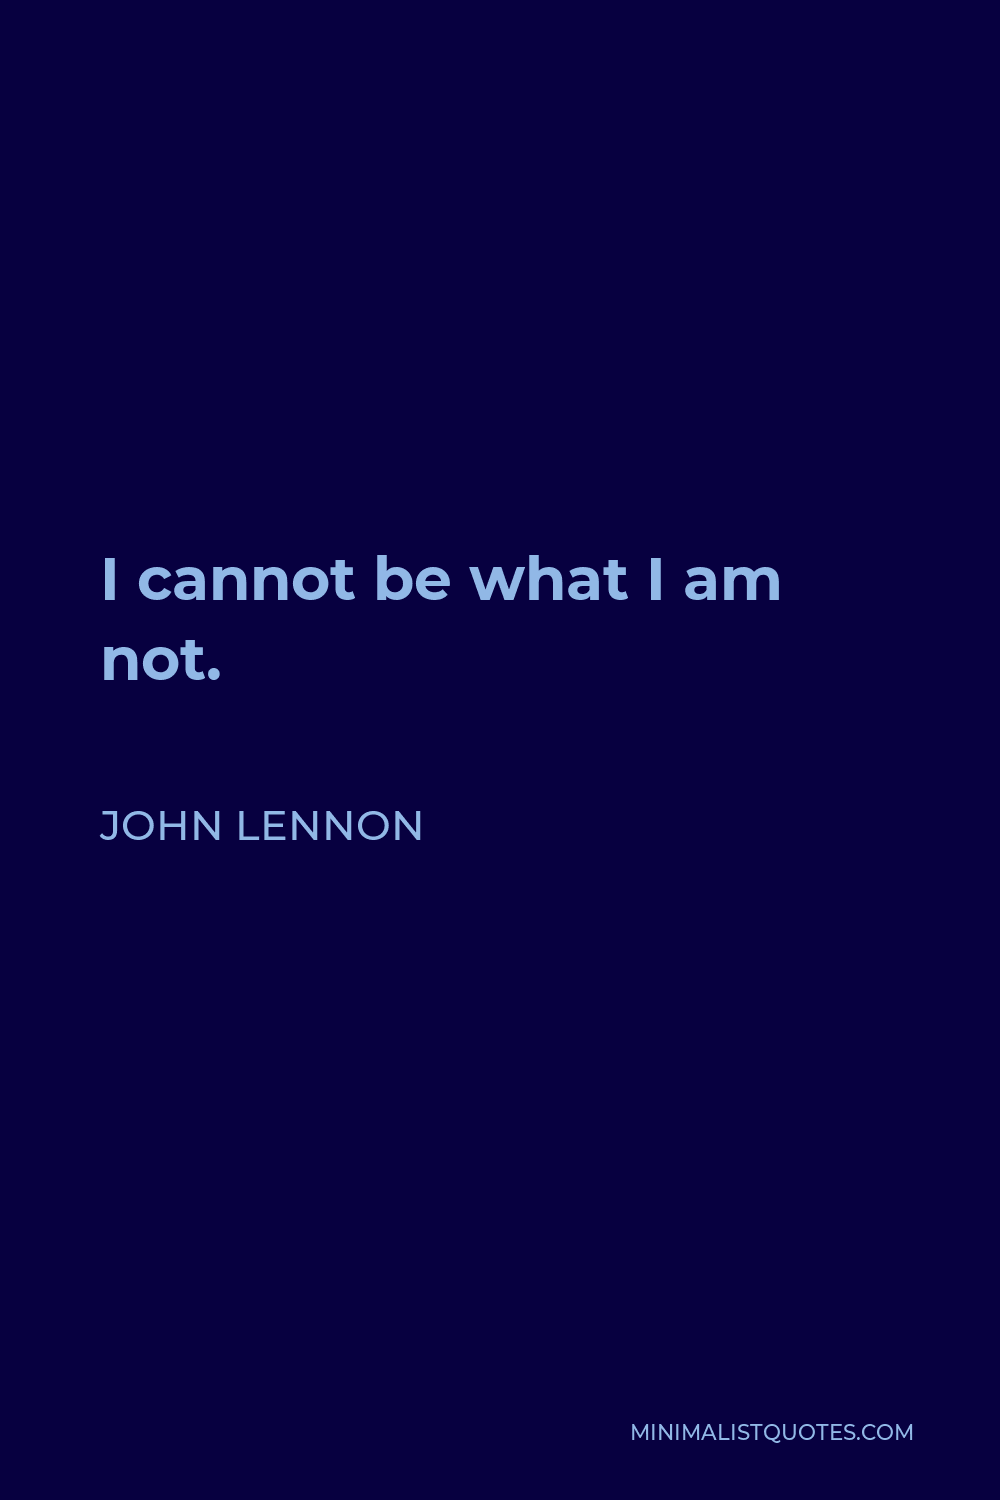 John Lennon Quote - I cannot be what I am not.